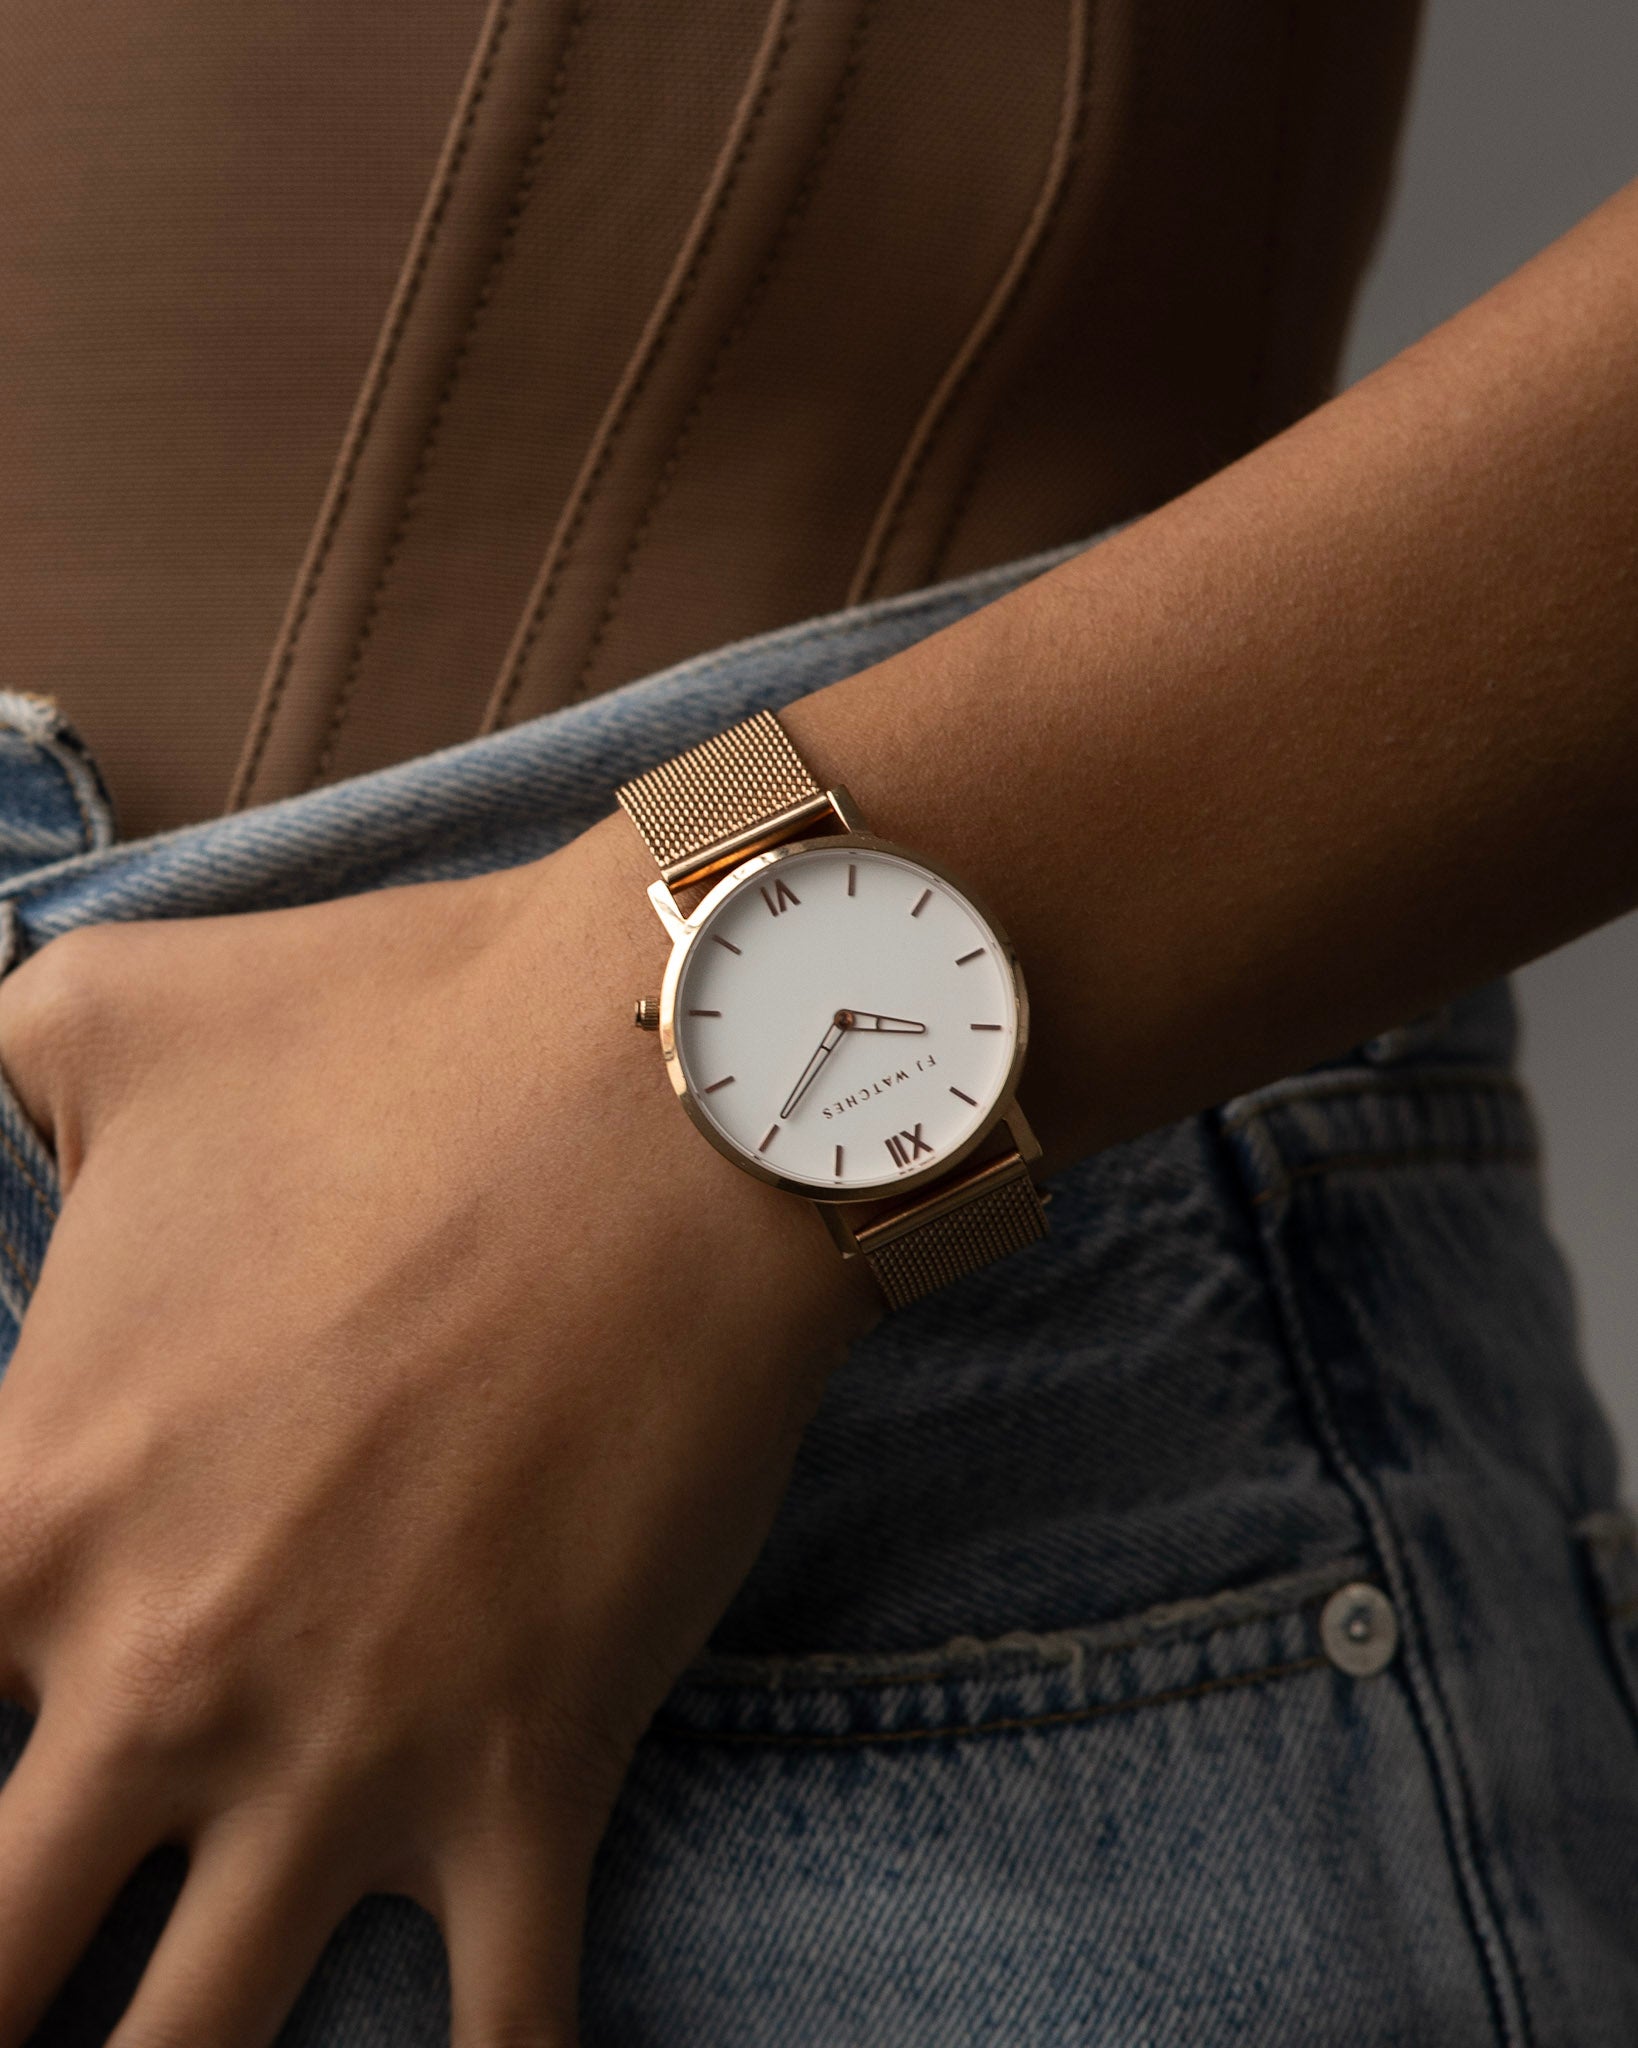 Discover Golden Sun, a 36 mm women's watch from Five Jwlry with a white and rose gold dial. This one can be paired with a rose gold or black mesh band!